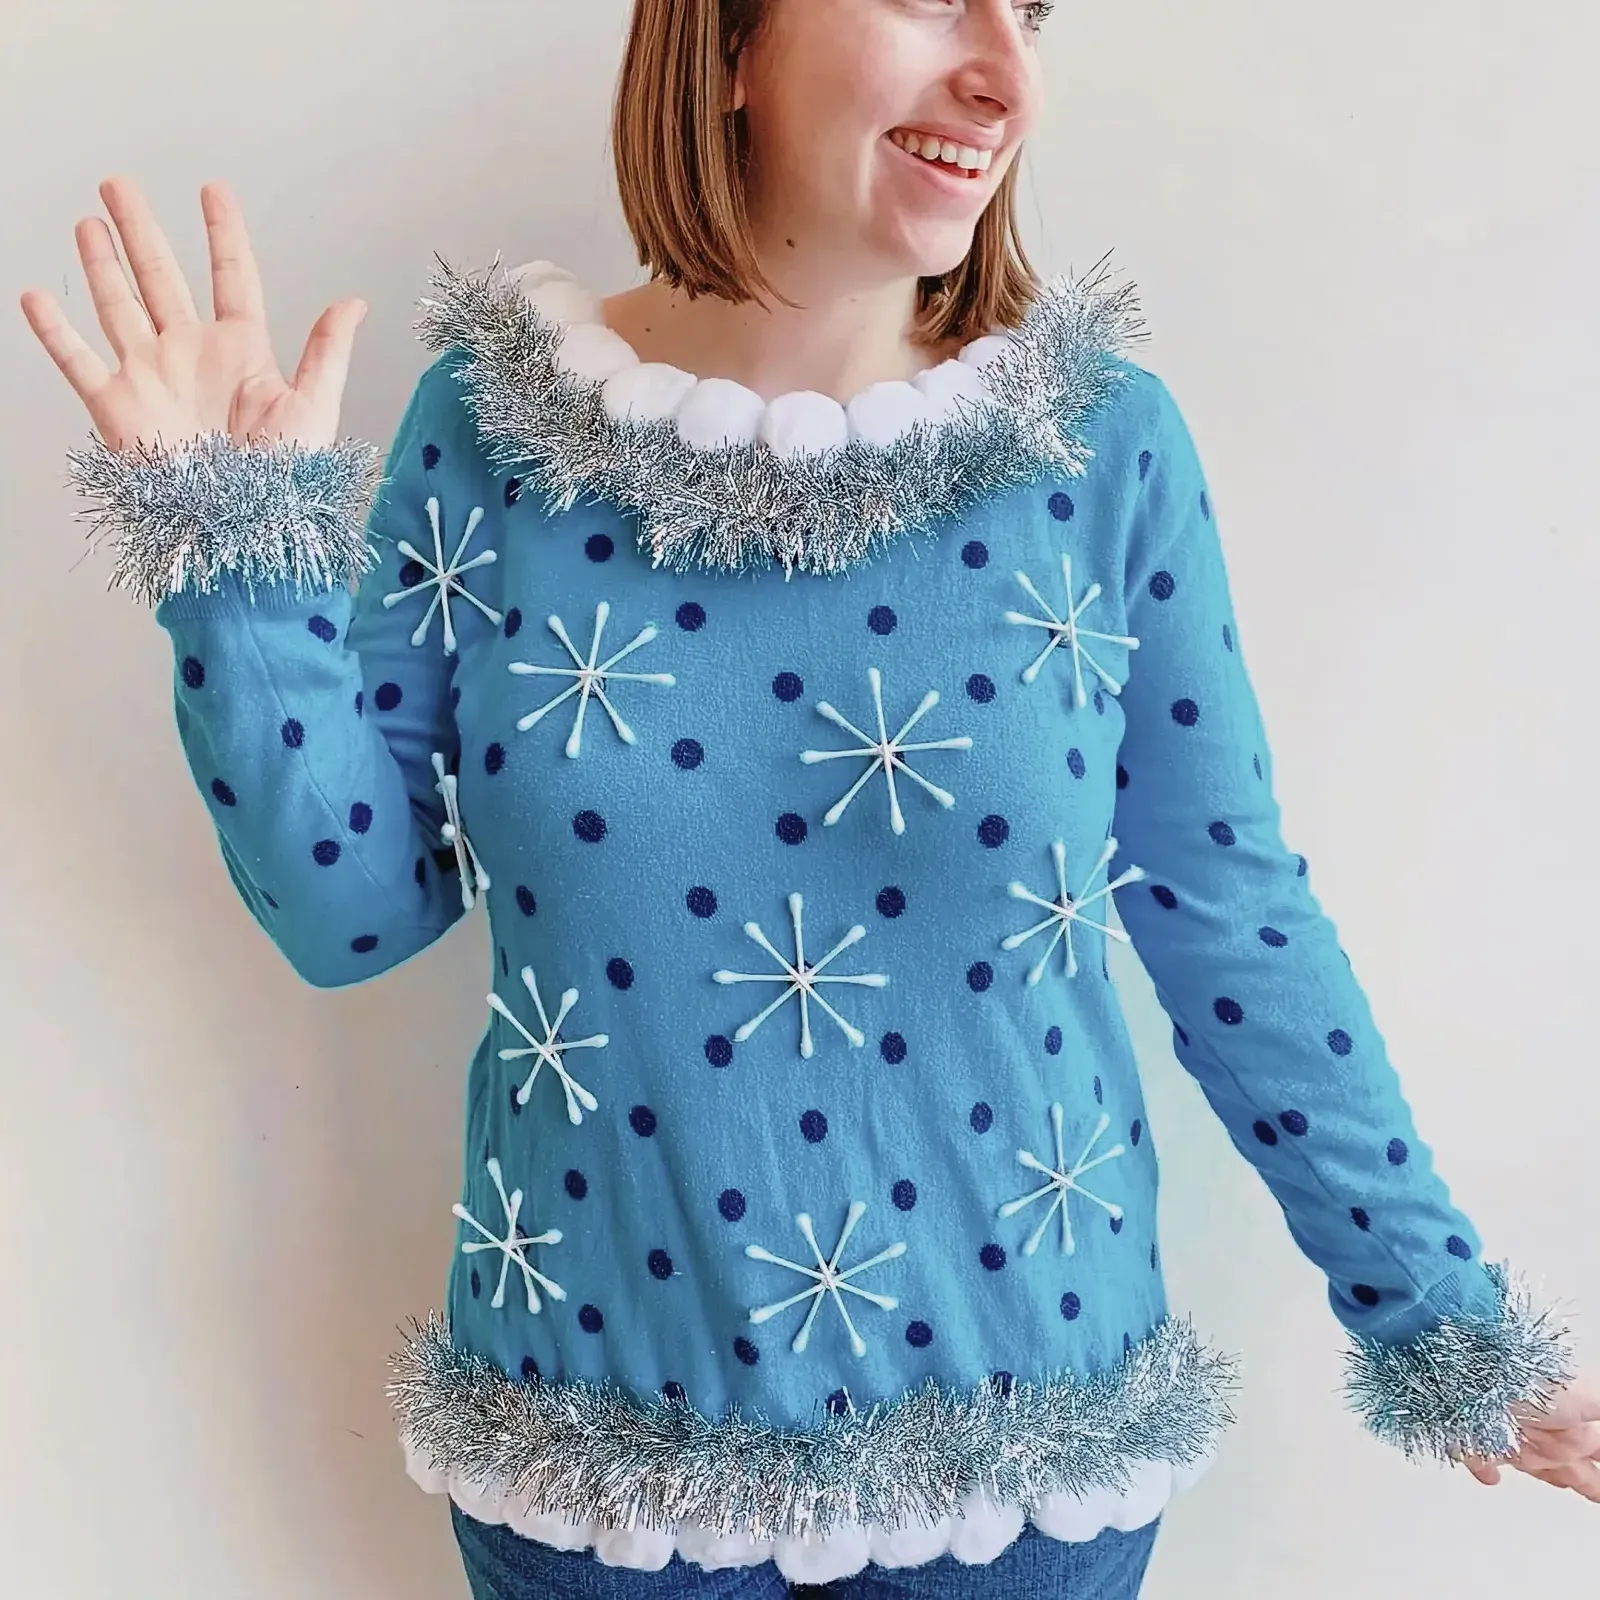 Crafting a unique ugly Christmas sweater with Swisspers cotton products.